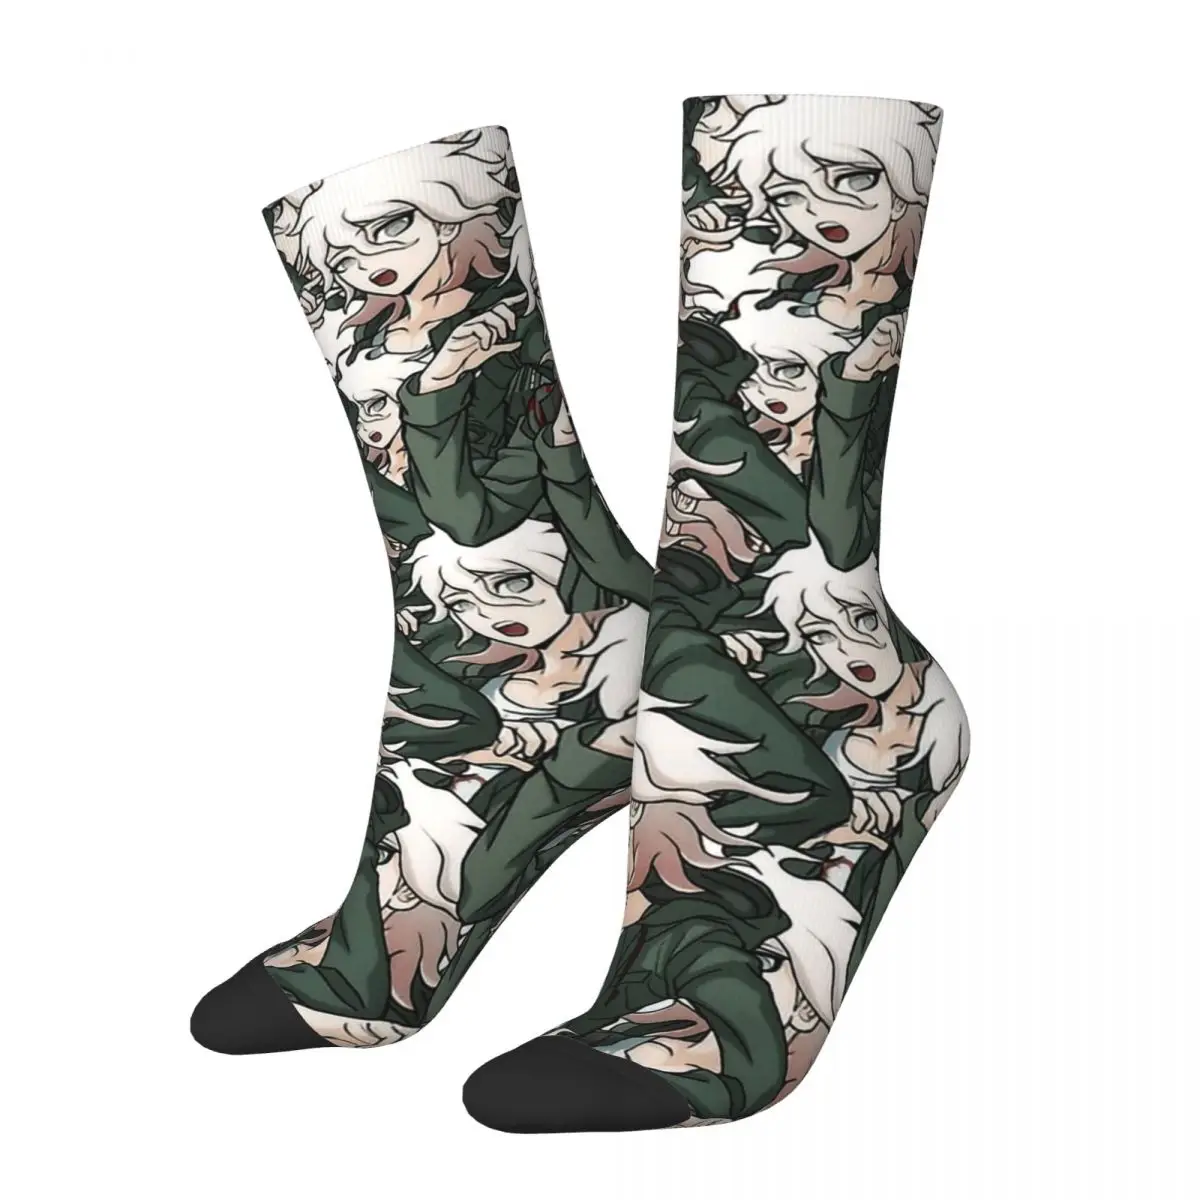 Nagito Komaeda Voice Hope Retro Danganronpa Makoto Game Unisex Socks Hiking 3D Print Happy Socks Street Style Crazy Sock crazy horse leather watch roll travel case wristwatch pouch watch box portage exquisite retro slid in out organizer for men gift